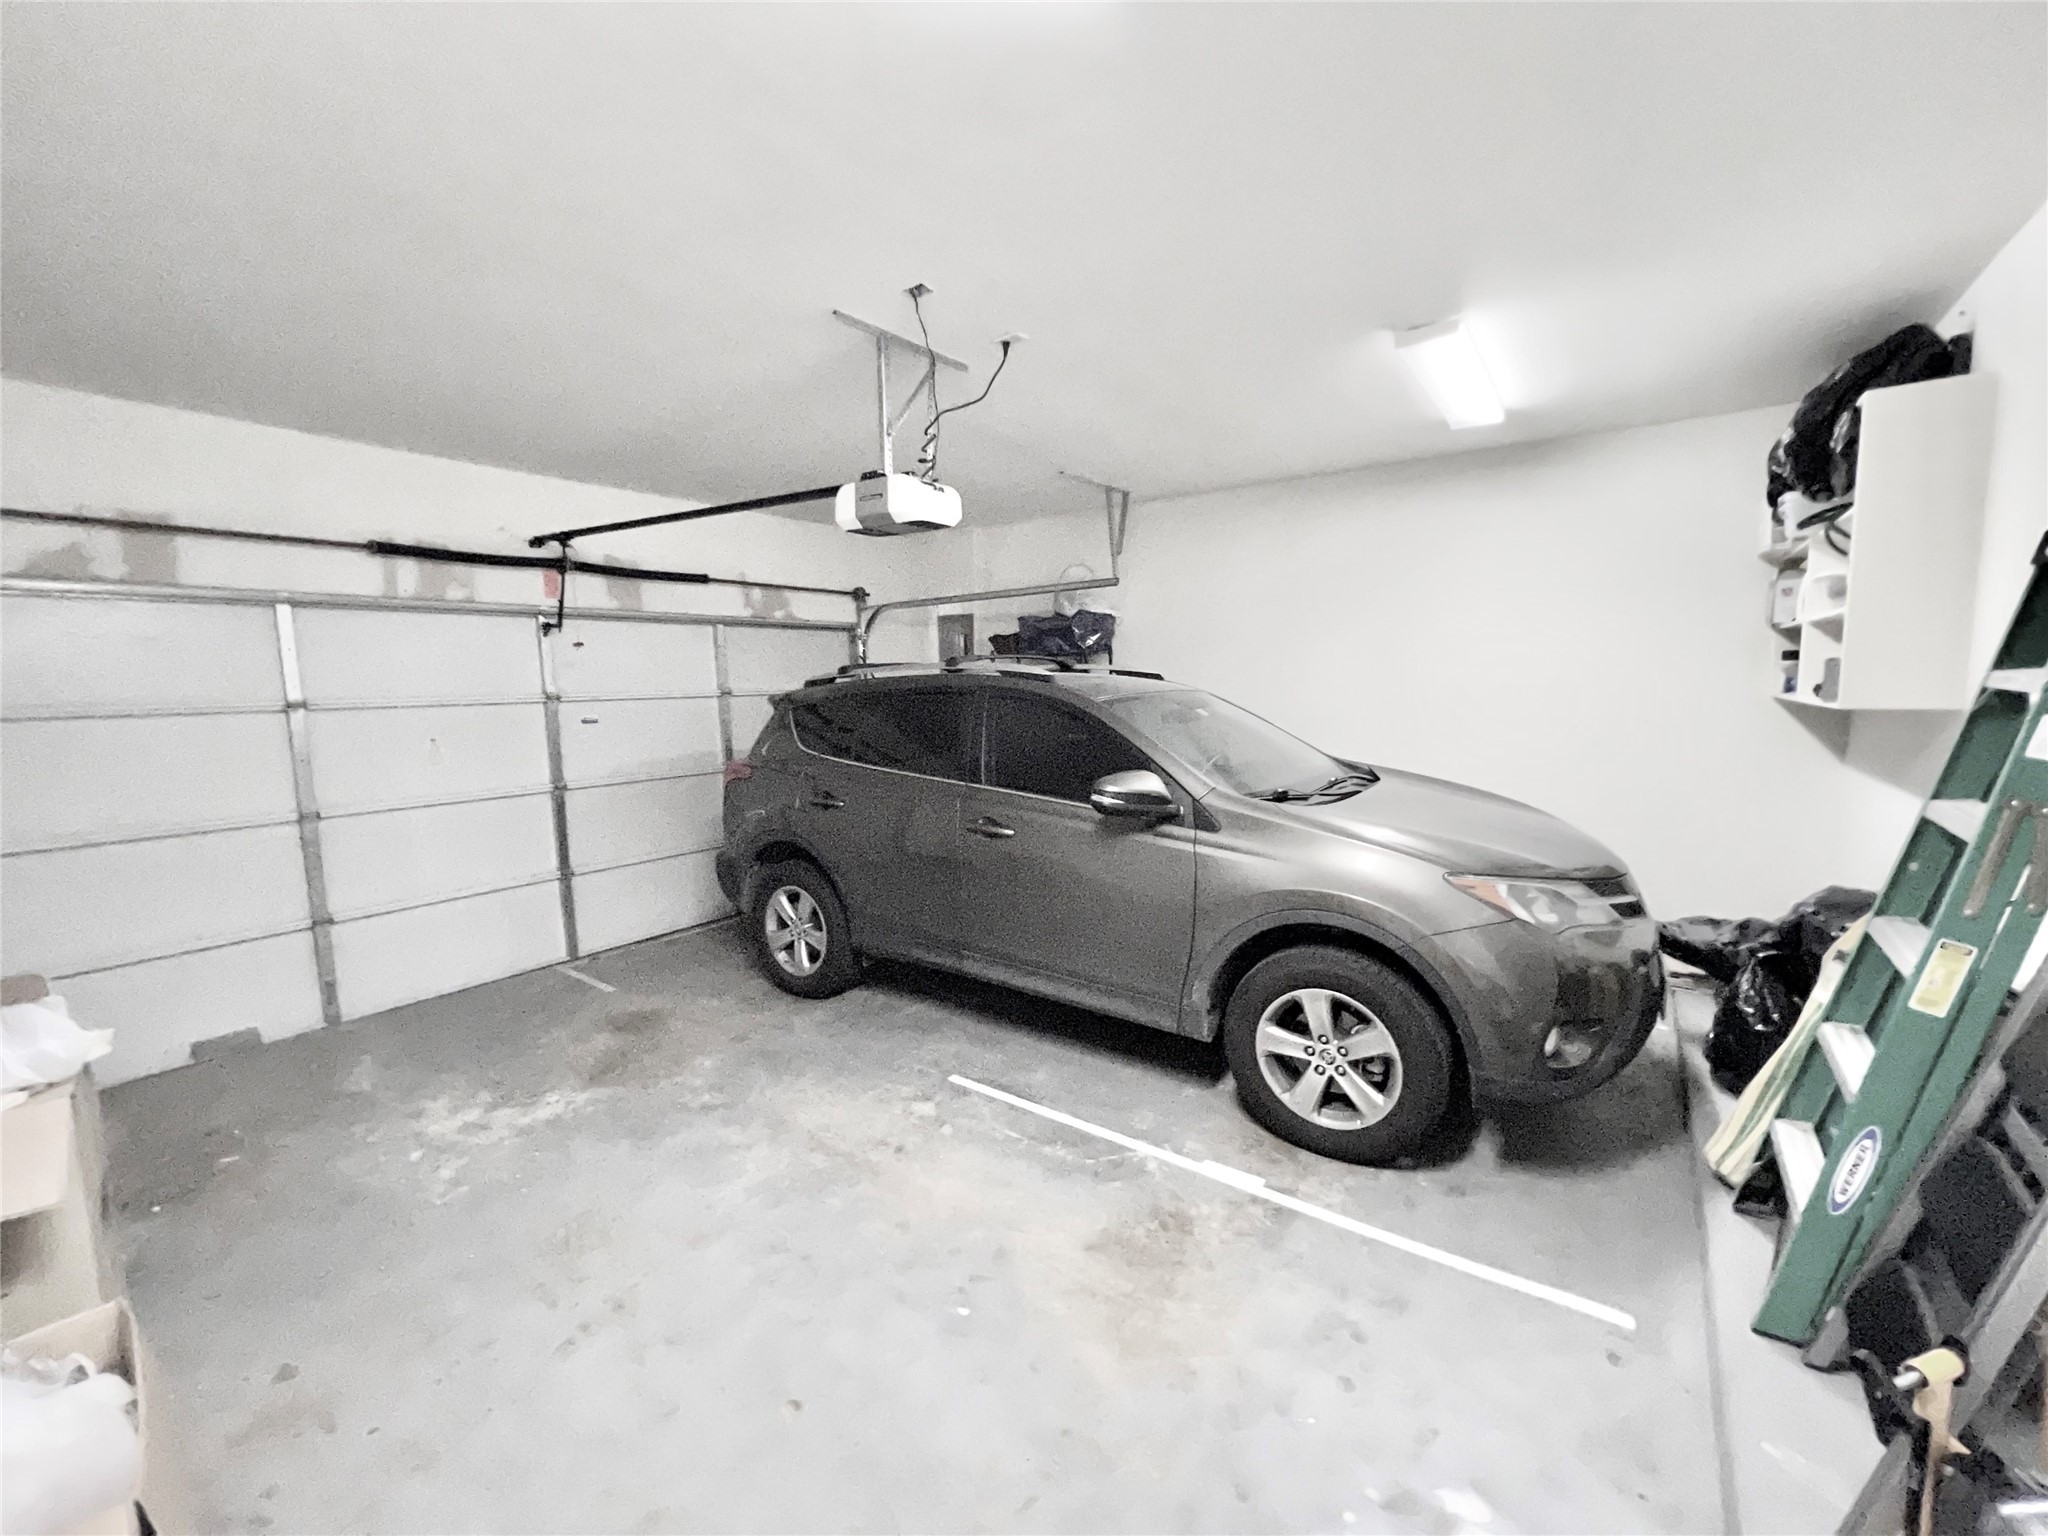 2 car garage with room for work benches and storage.